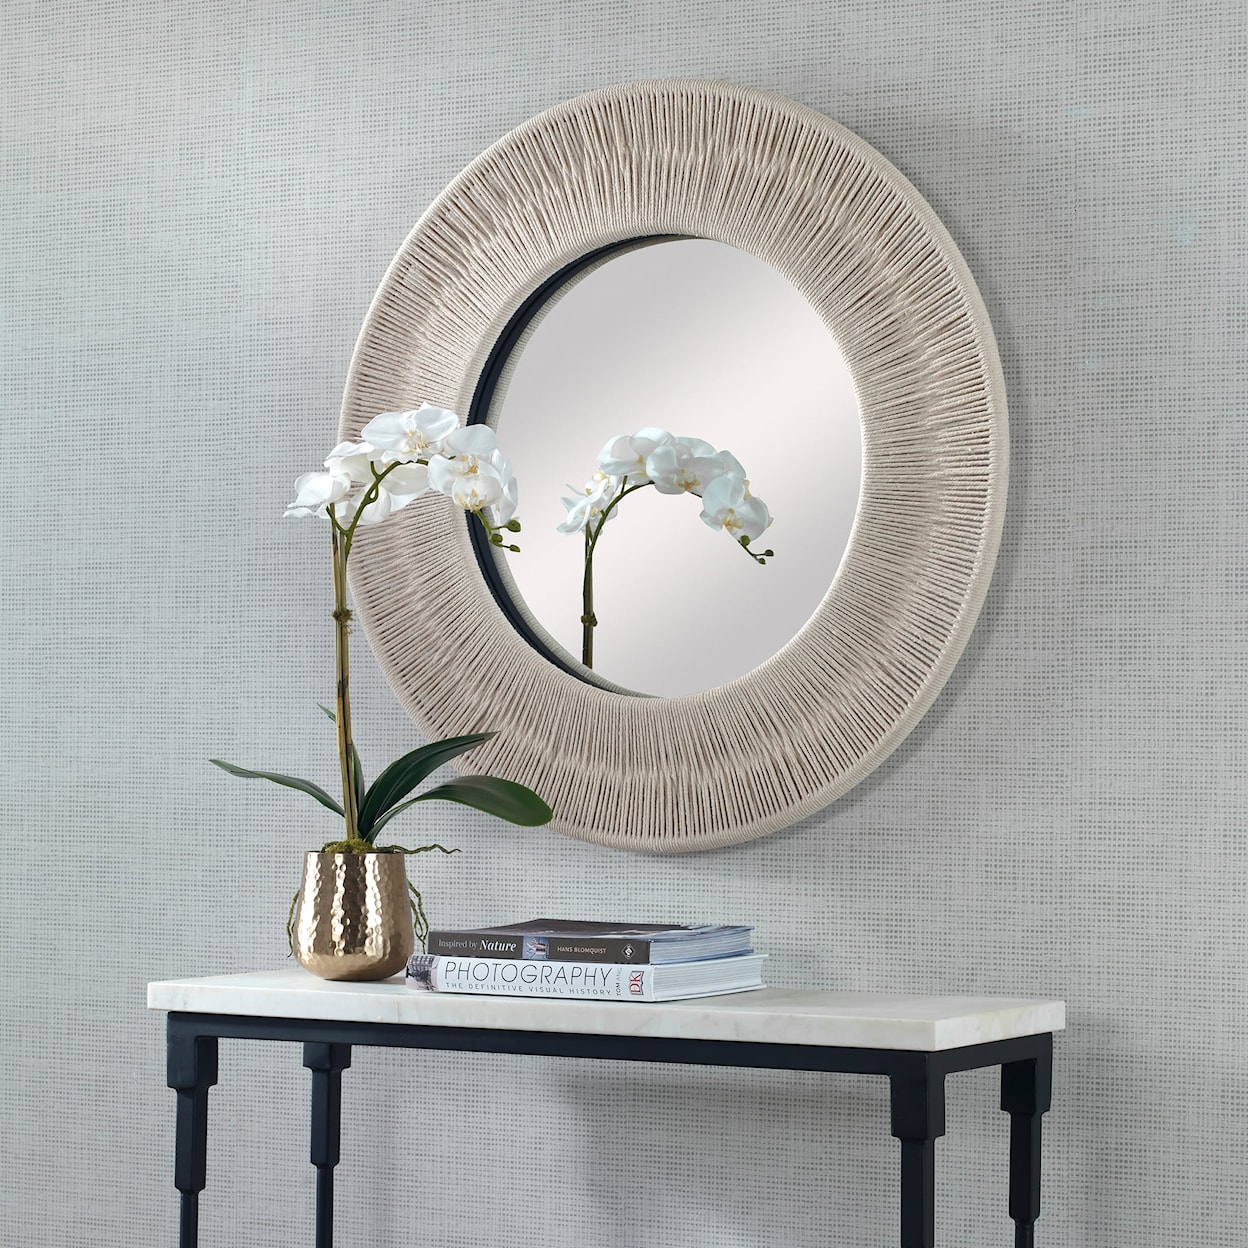 Uttermost Sailor's Knot Sailor's Knot White Small Round Mirror